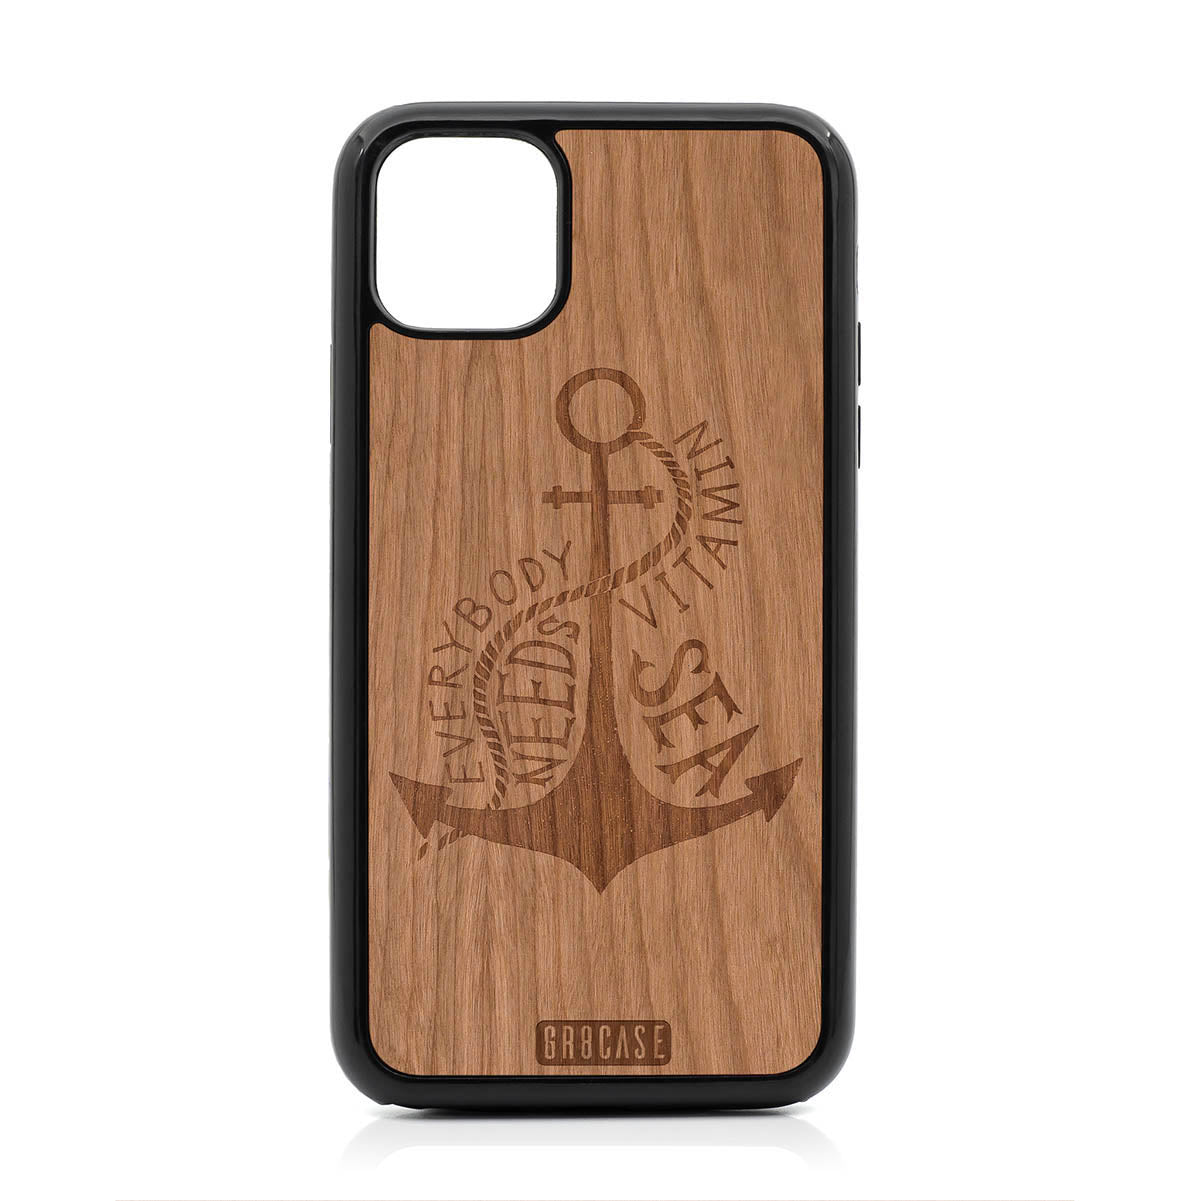 Everybody Needs Vitamin Sea (Anchor) Design Wood Case For iPhone 11 Pro Max by GR8CASE